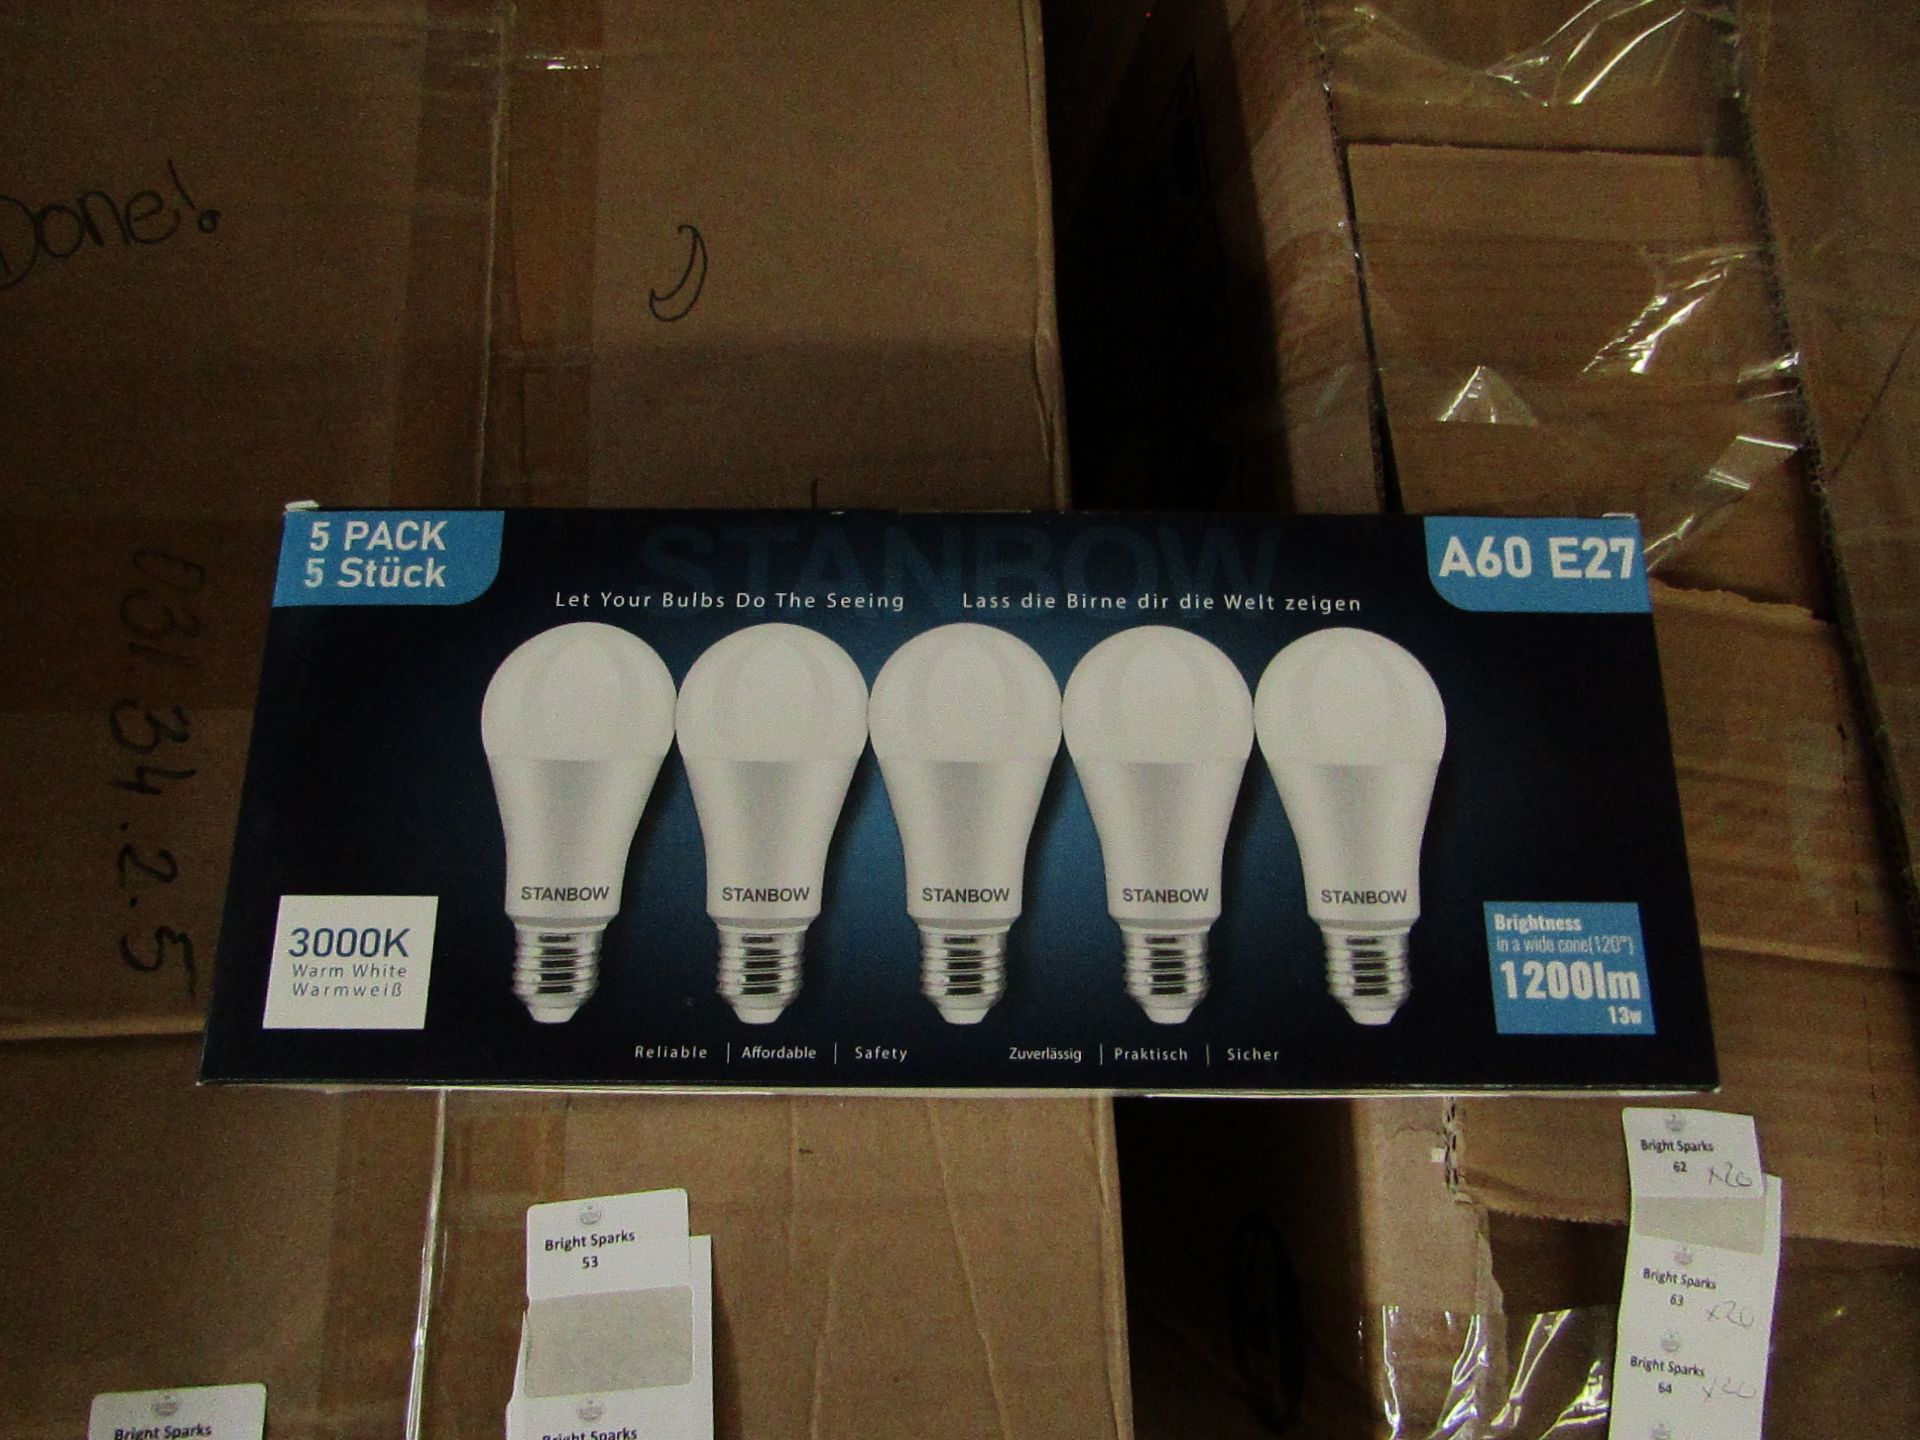 20x Packs of 5 Stanbow A60 E27 13w LED light bulbs, new and boxed